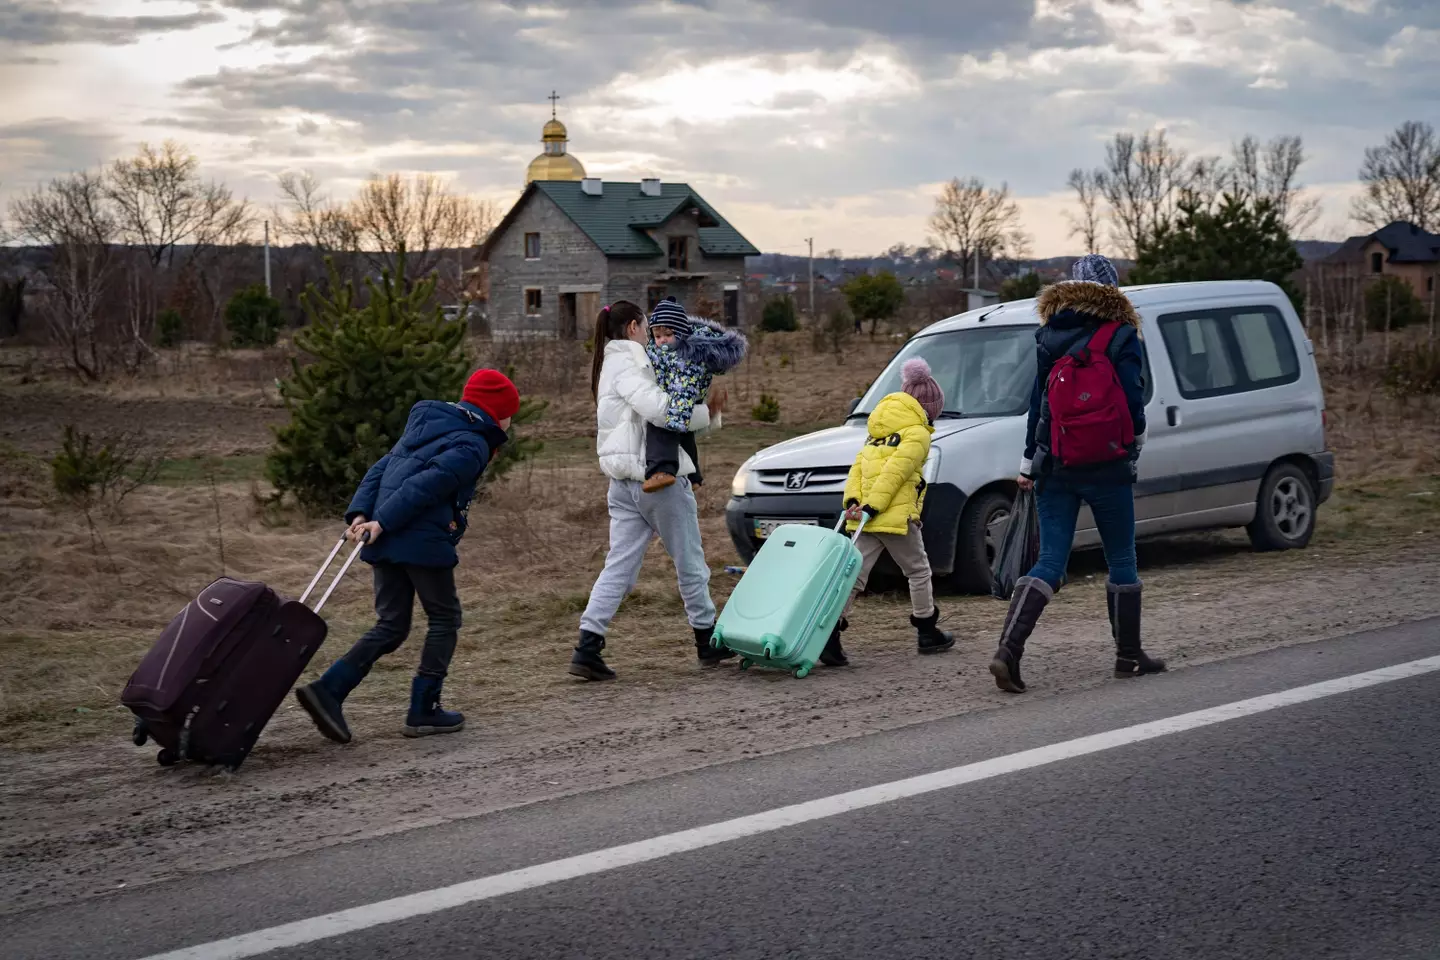 Millions have been forced to flee their homes following Russia's invasion.